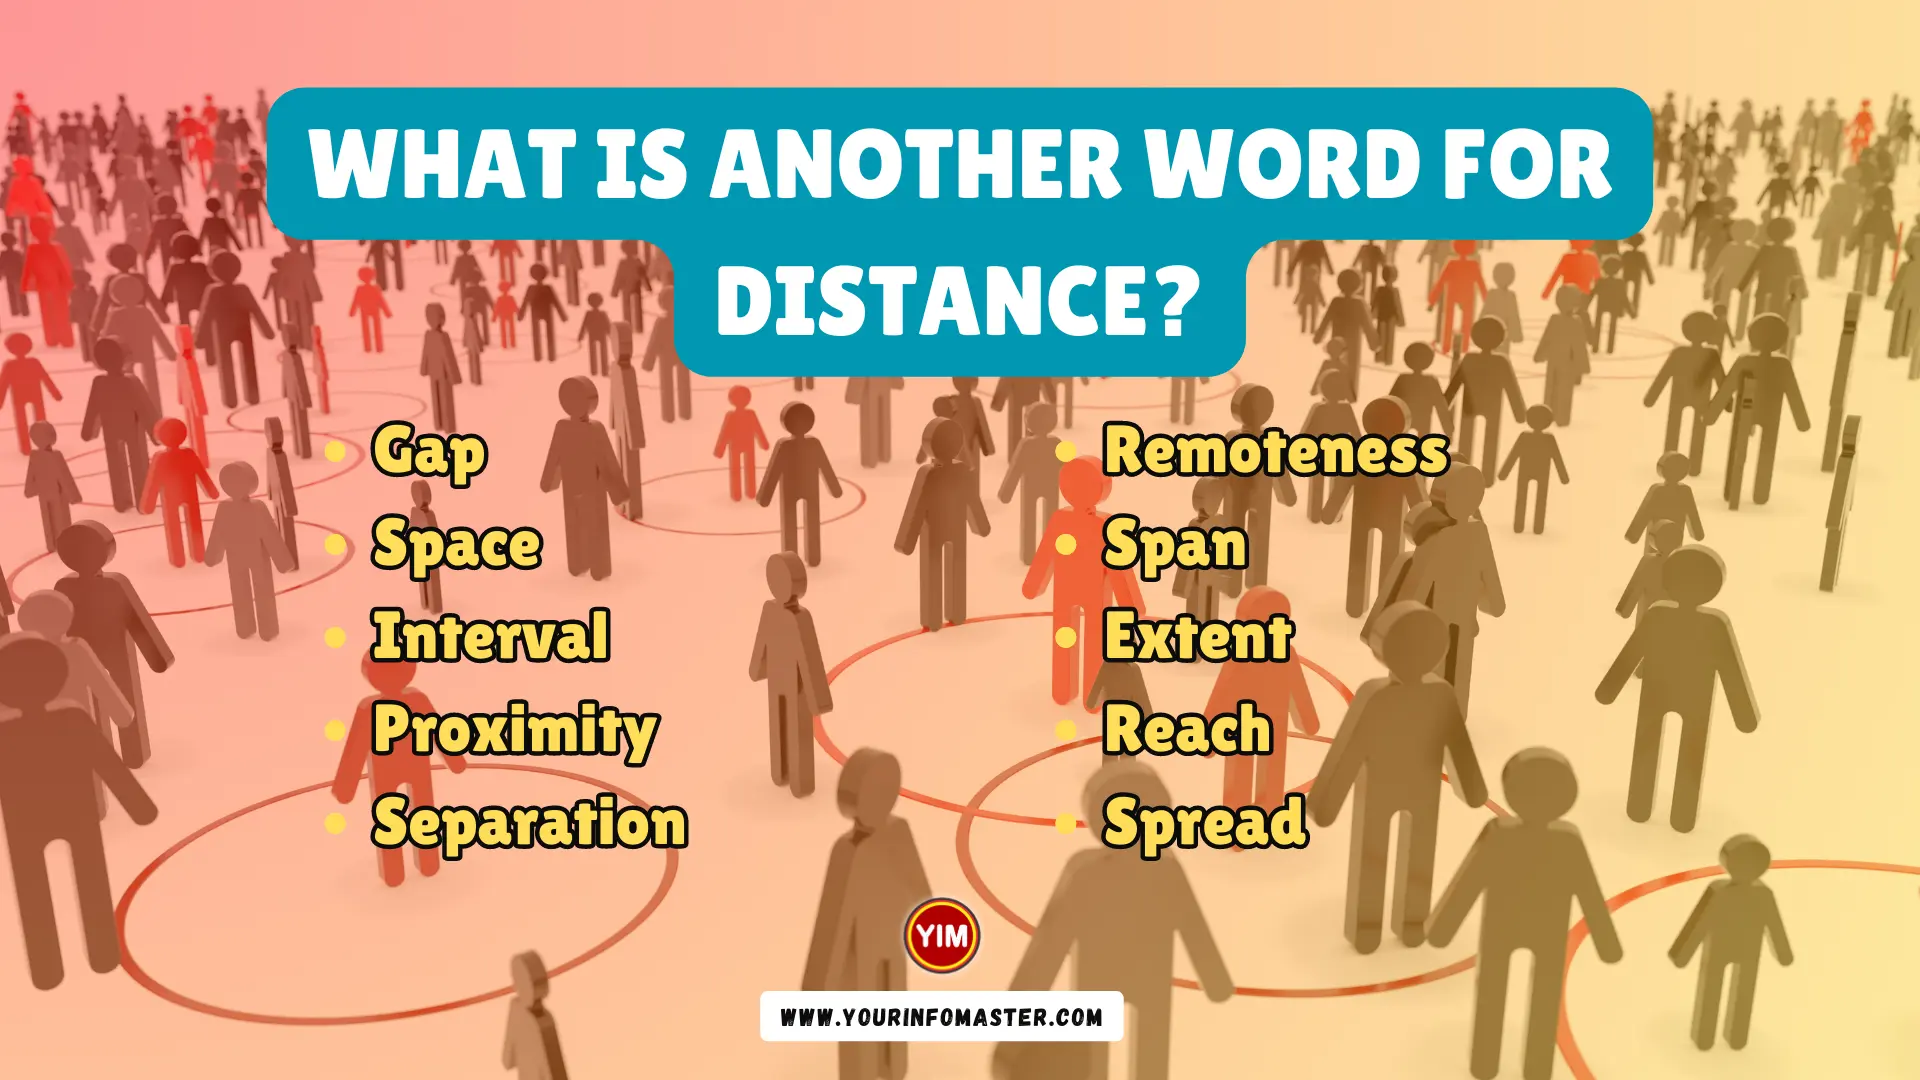 What is another word for Distance